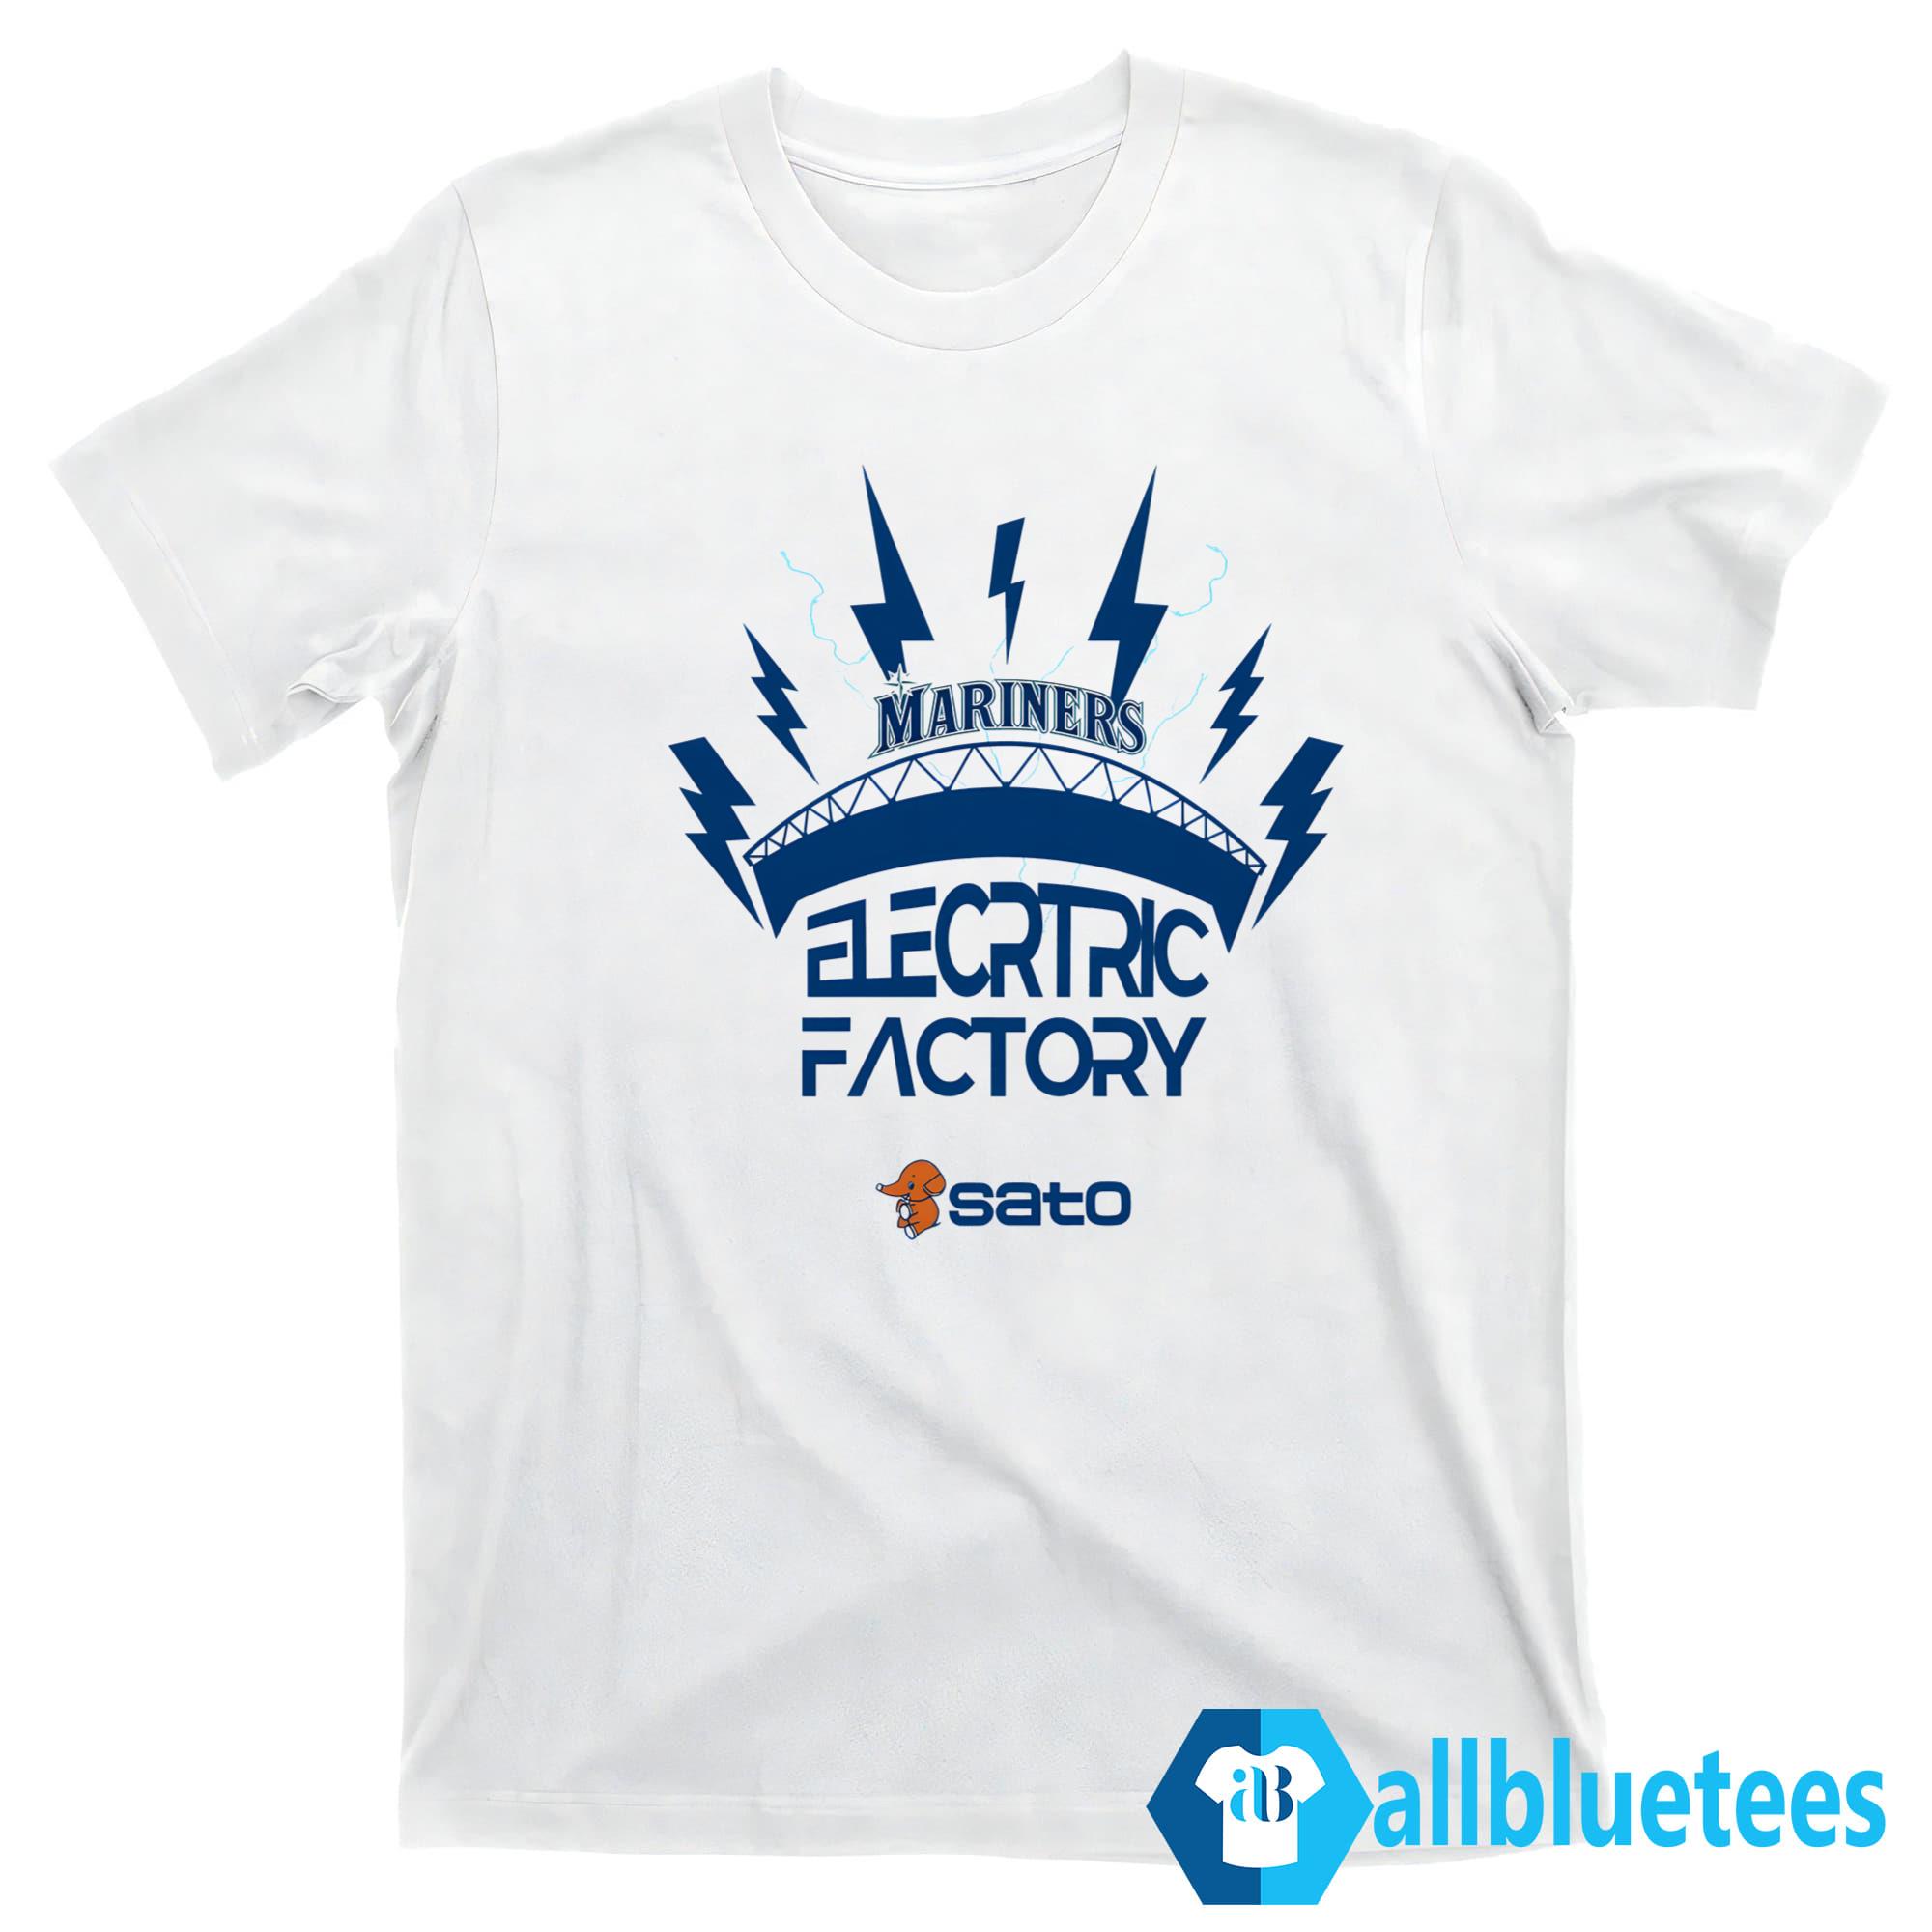 Seattle Mariners Electric Factory Shirt Mariners Team Store - Hectee